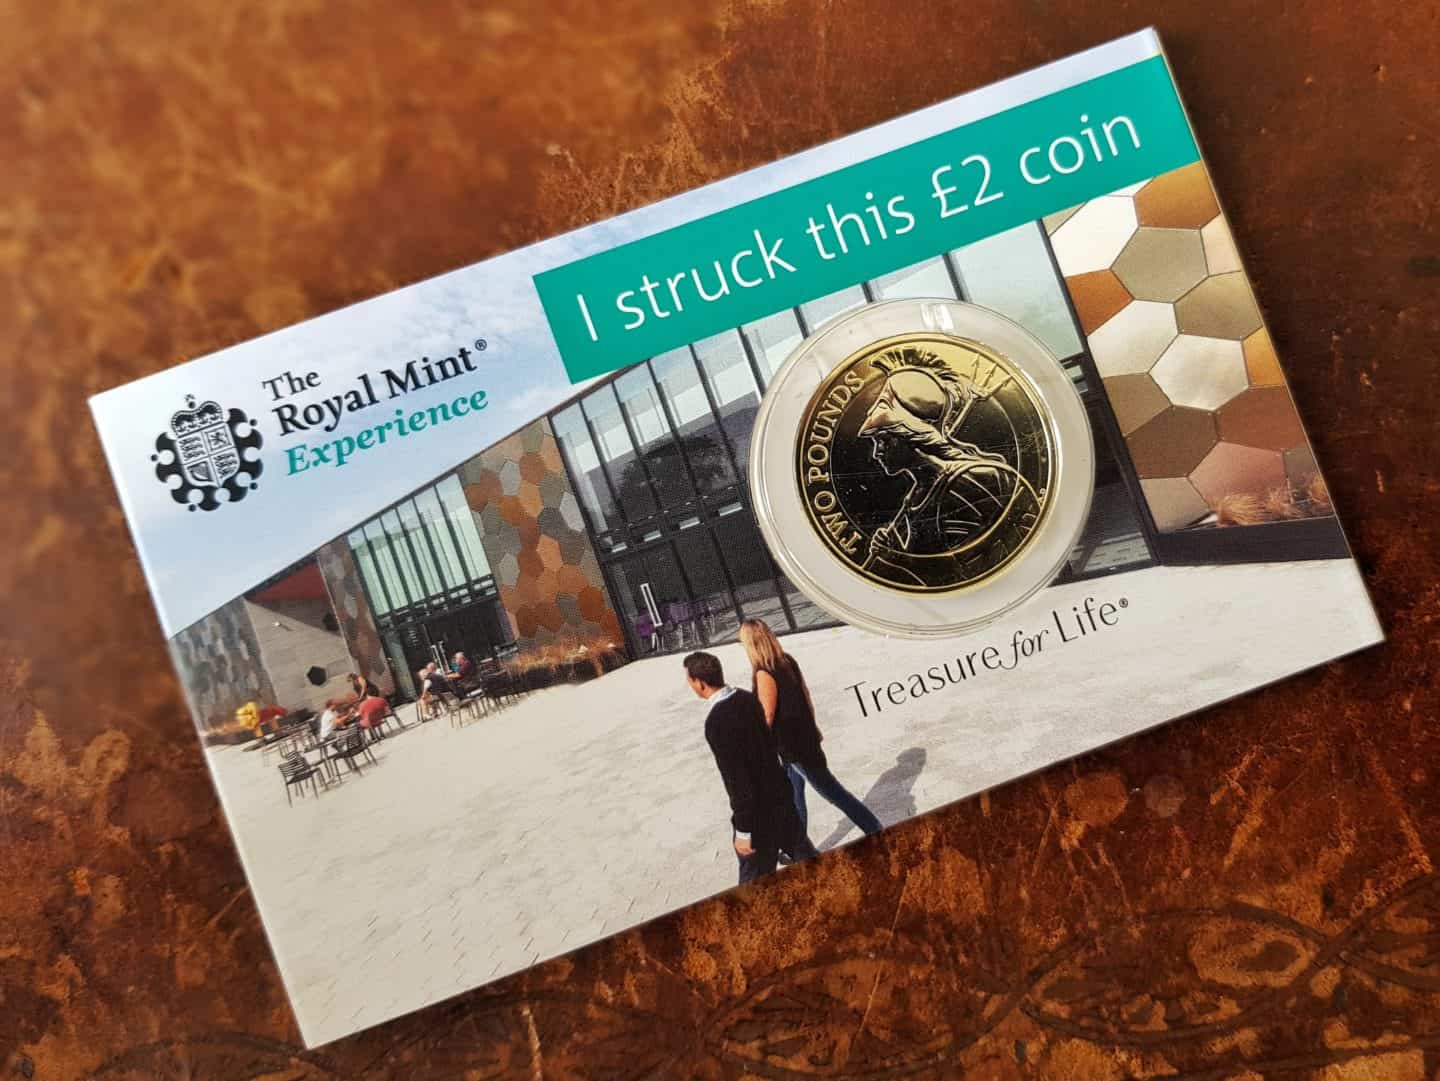 Coin struck at Royal Mint Experience Cardiff